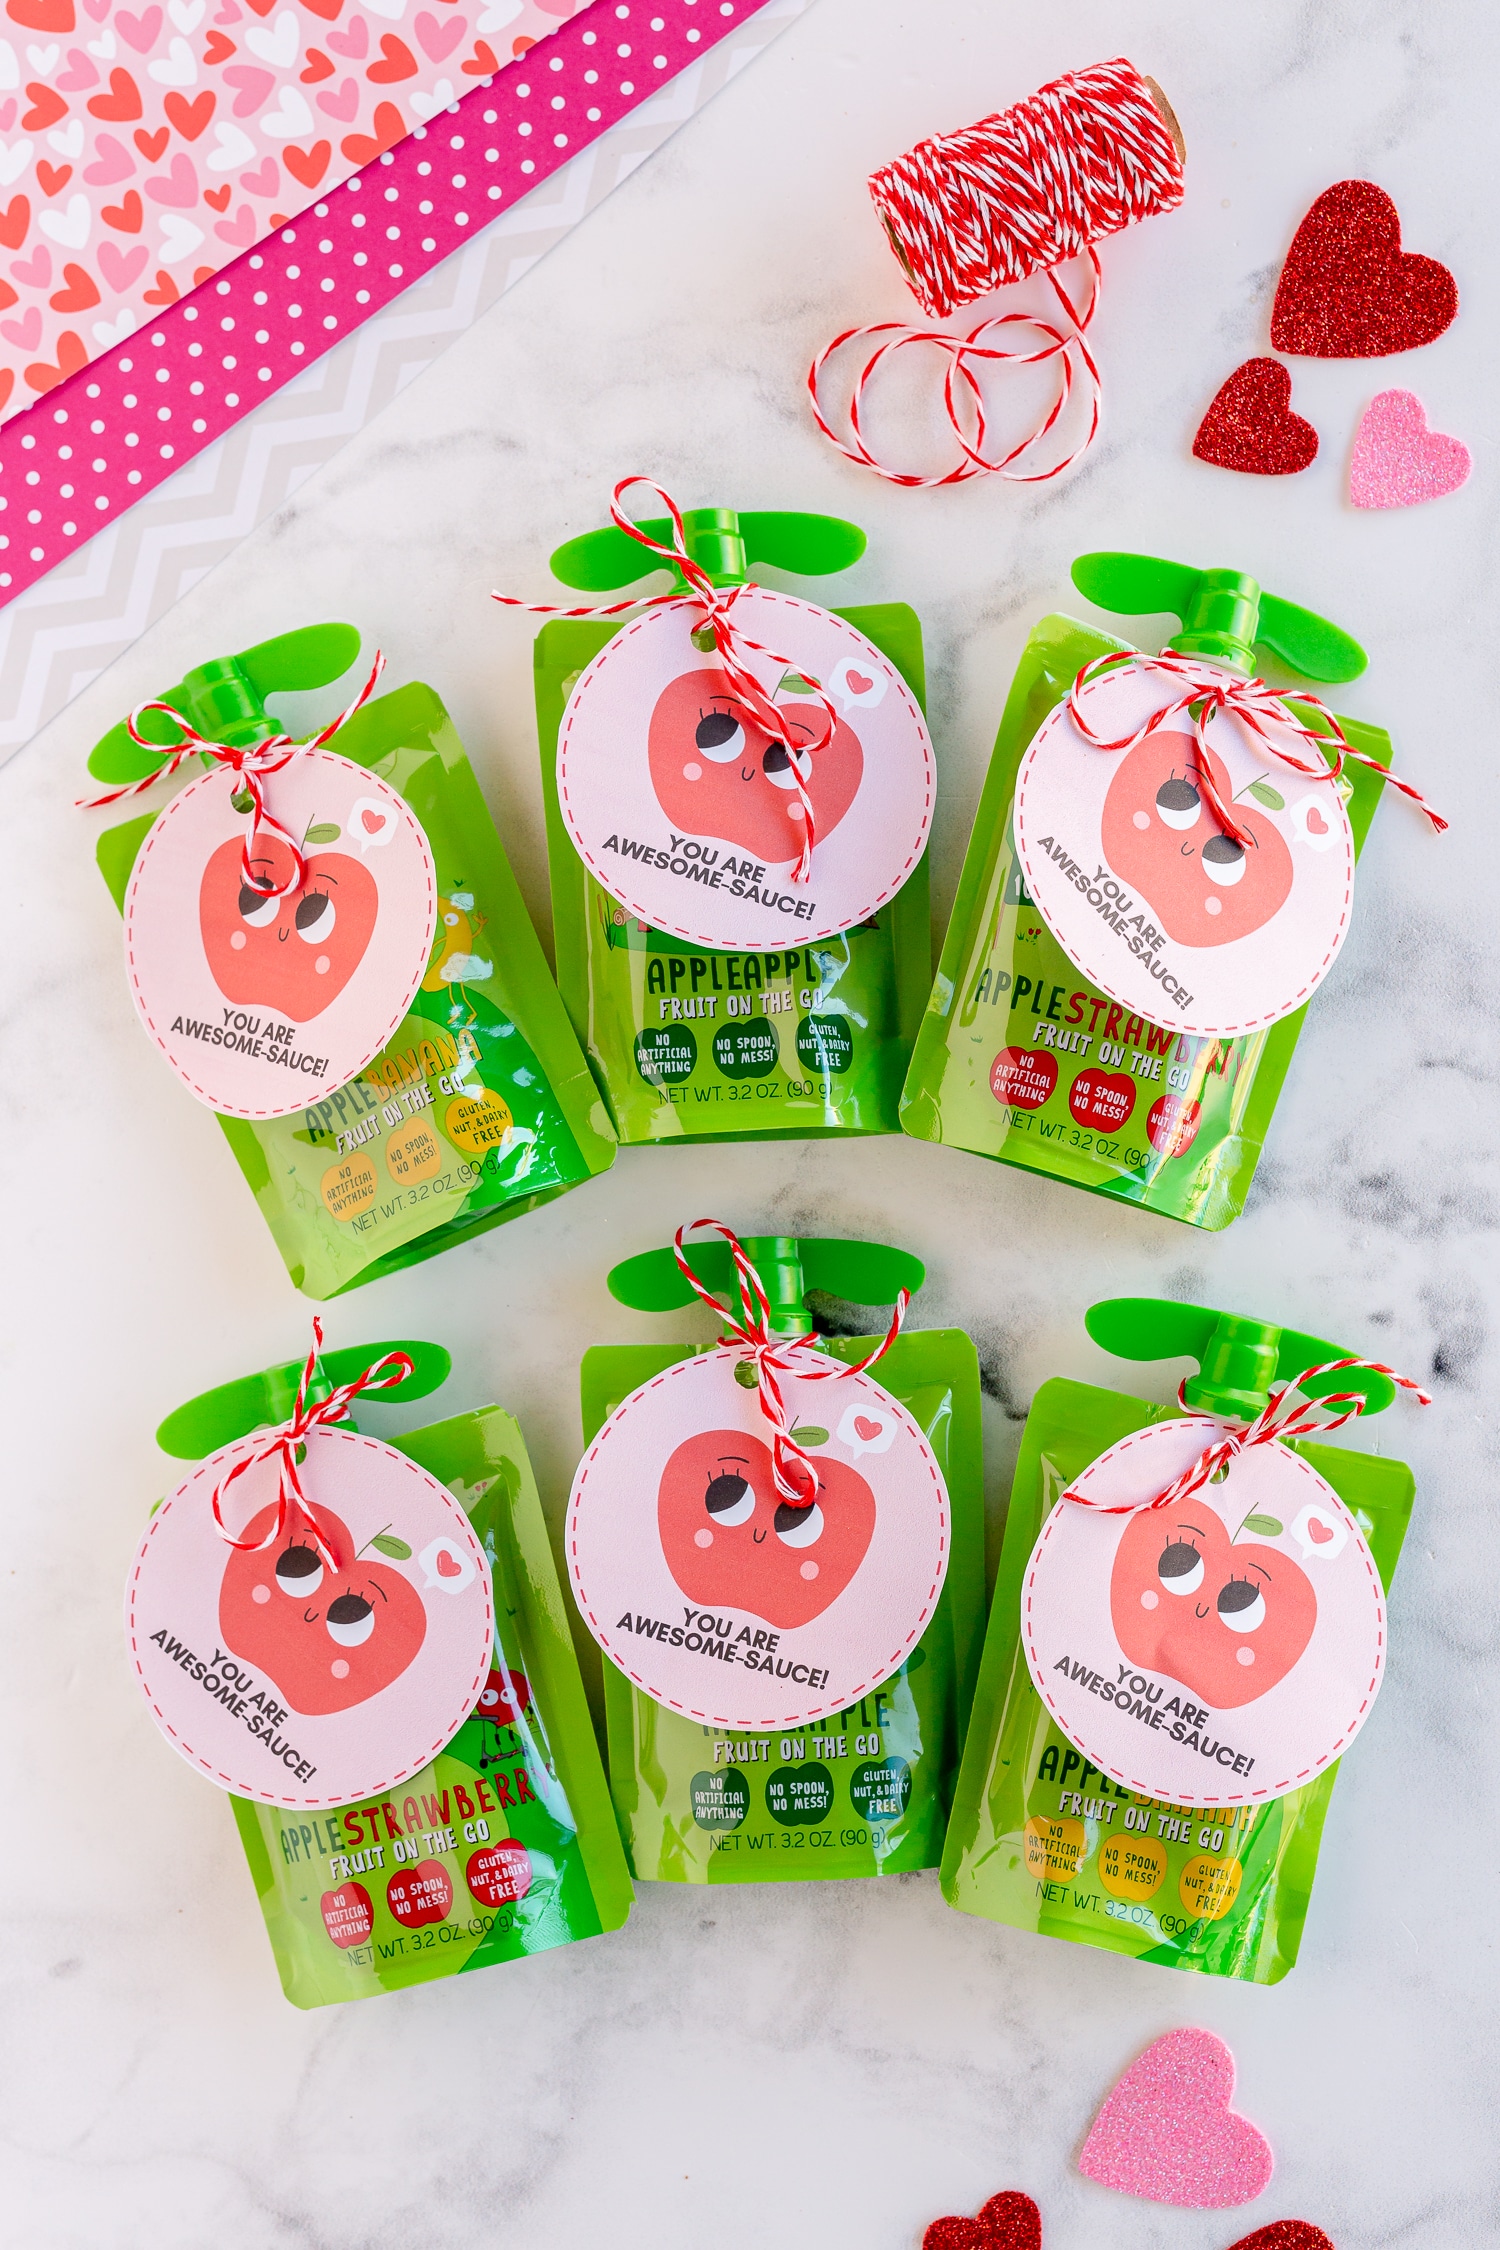 You are Awesome-sauce Valentine Printable attached to applesauce pouches